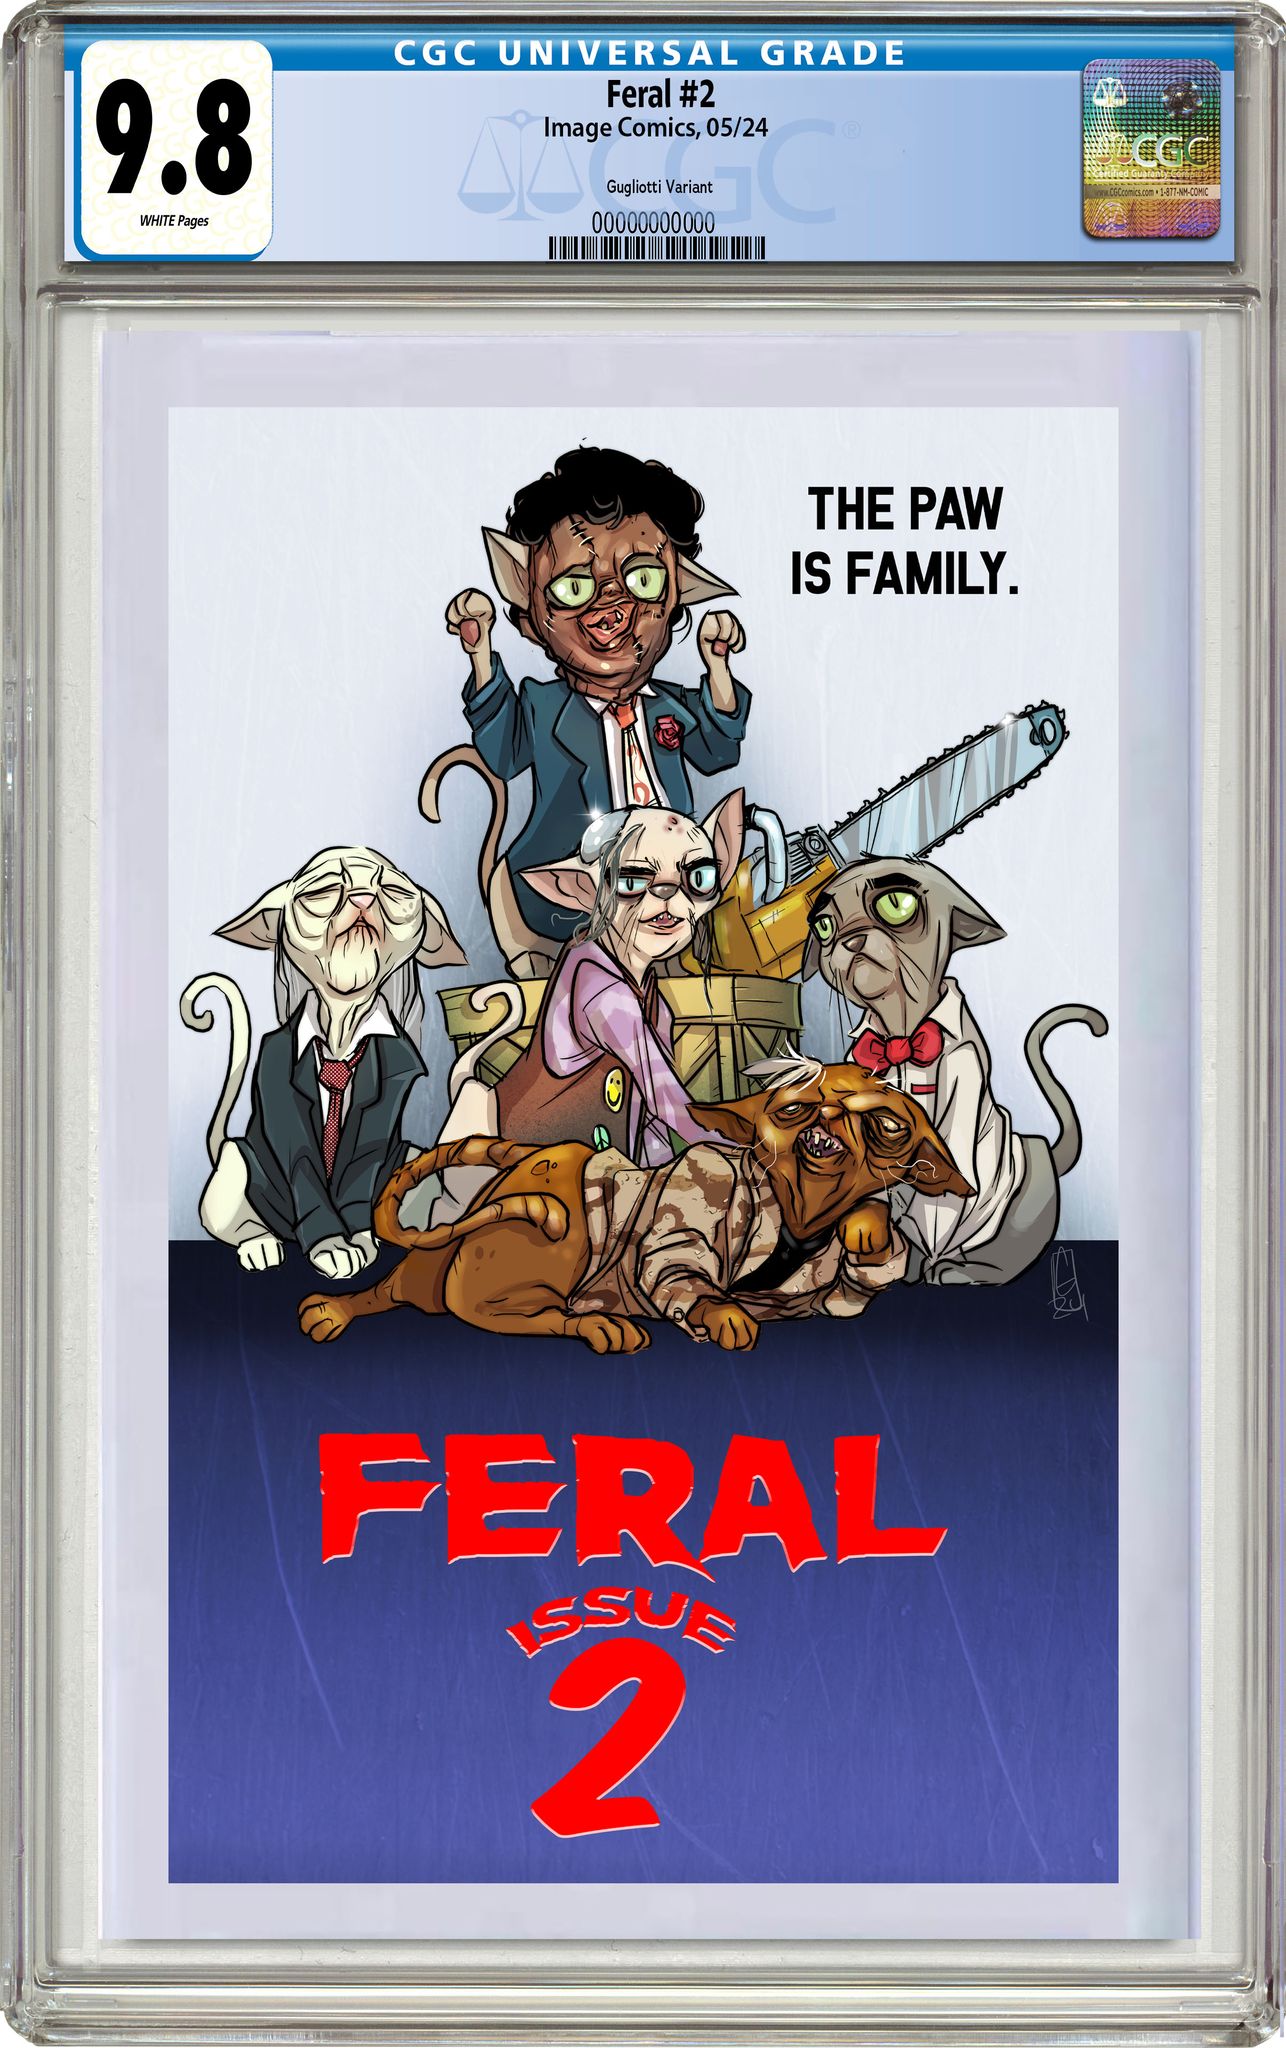 FERAL #2 CHRIS GUGLIOTTI EXCLUSIVE HOMAGE TO THE TEXAS CHAINSAW MASSACRE PT2 - 04/24/24